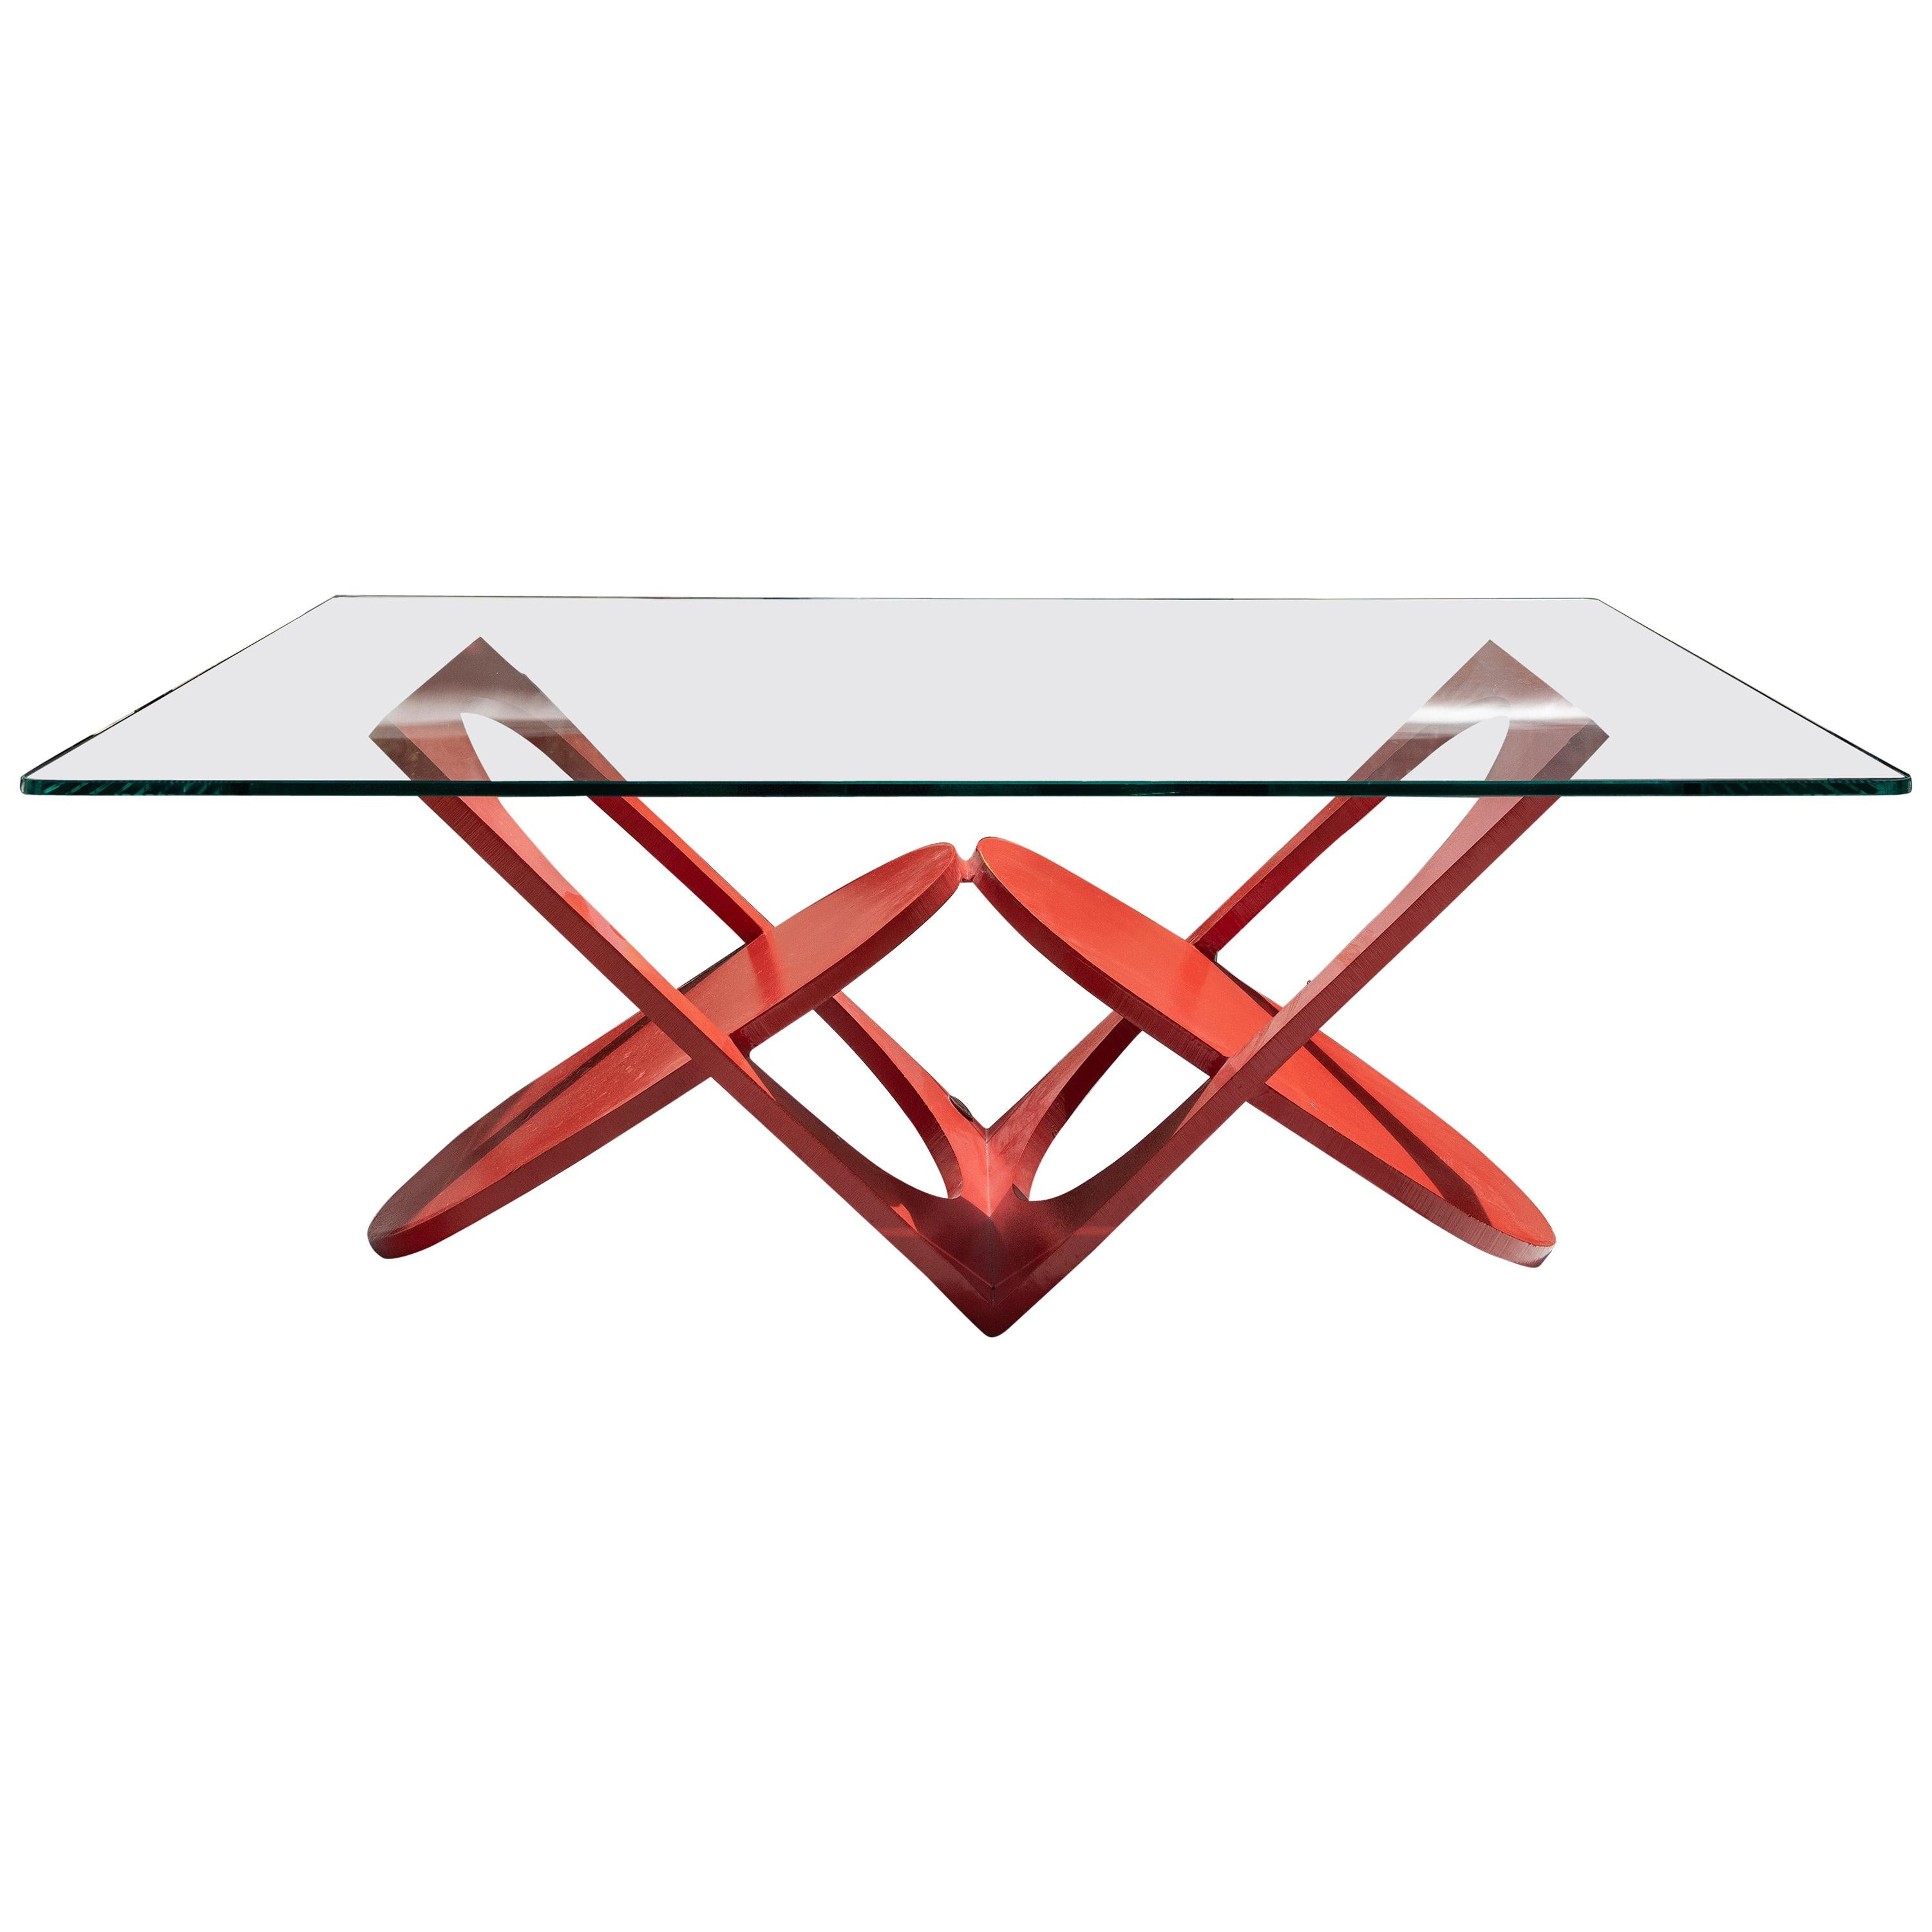 Painted Cast Iron Low Table by Valenti, Barcelona, circa 1970